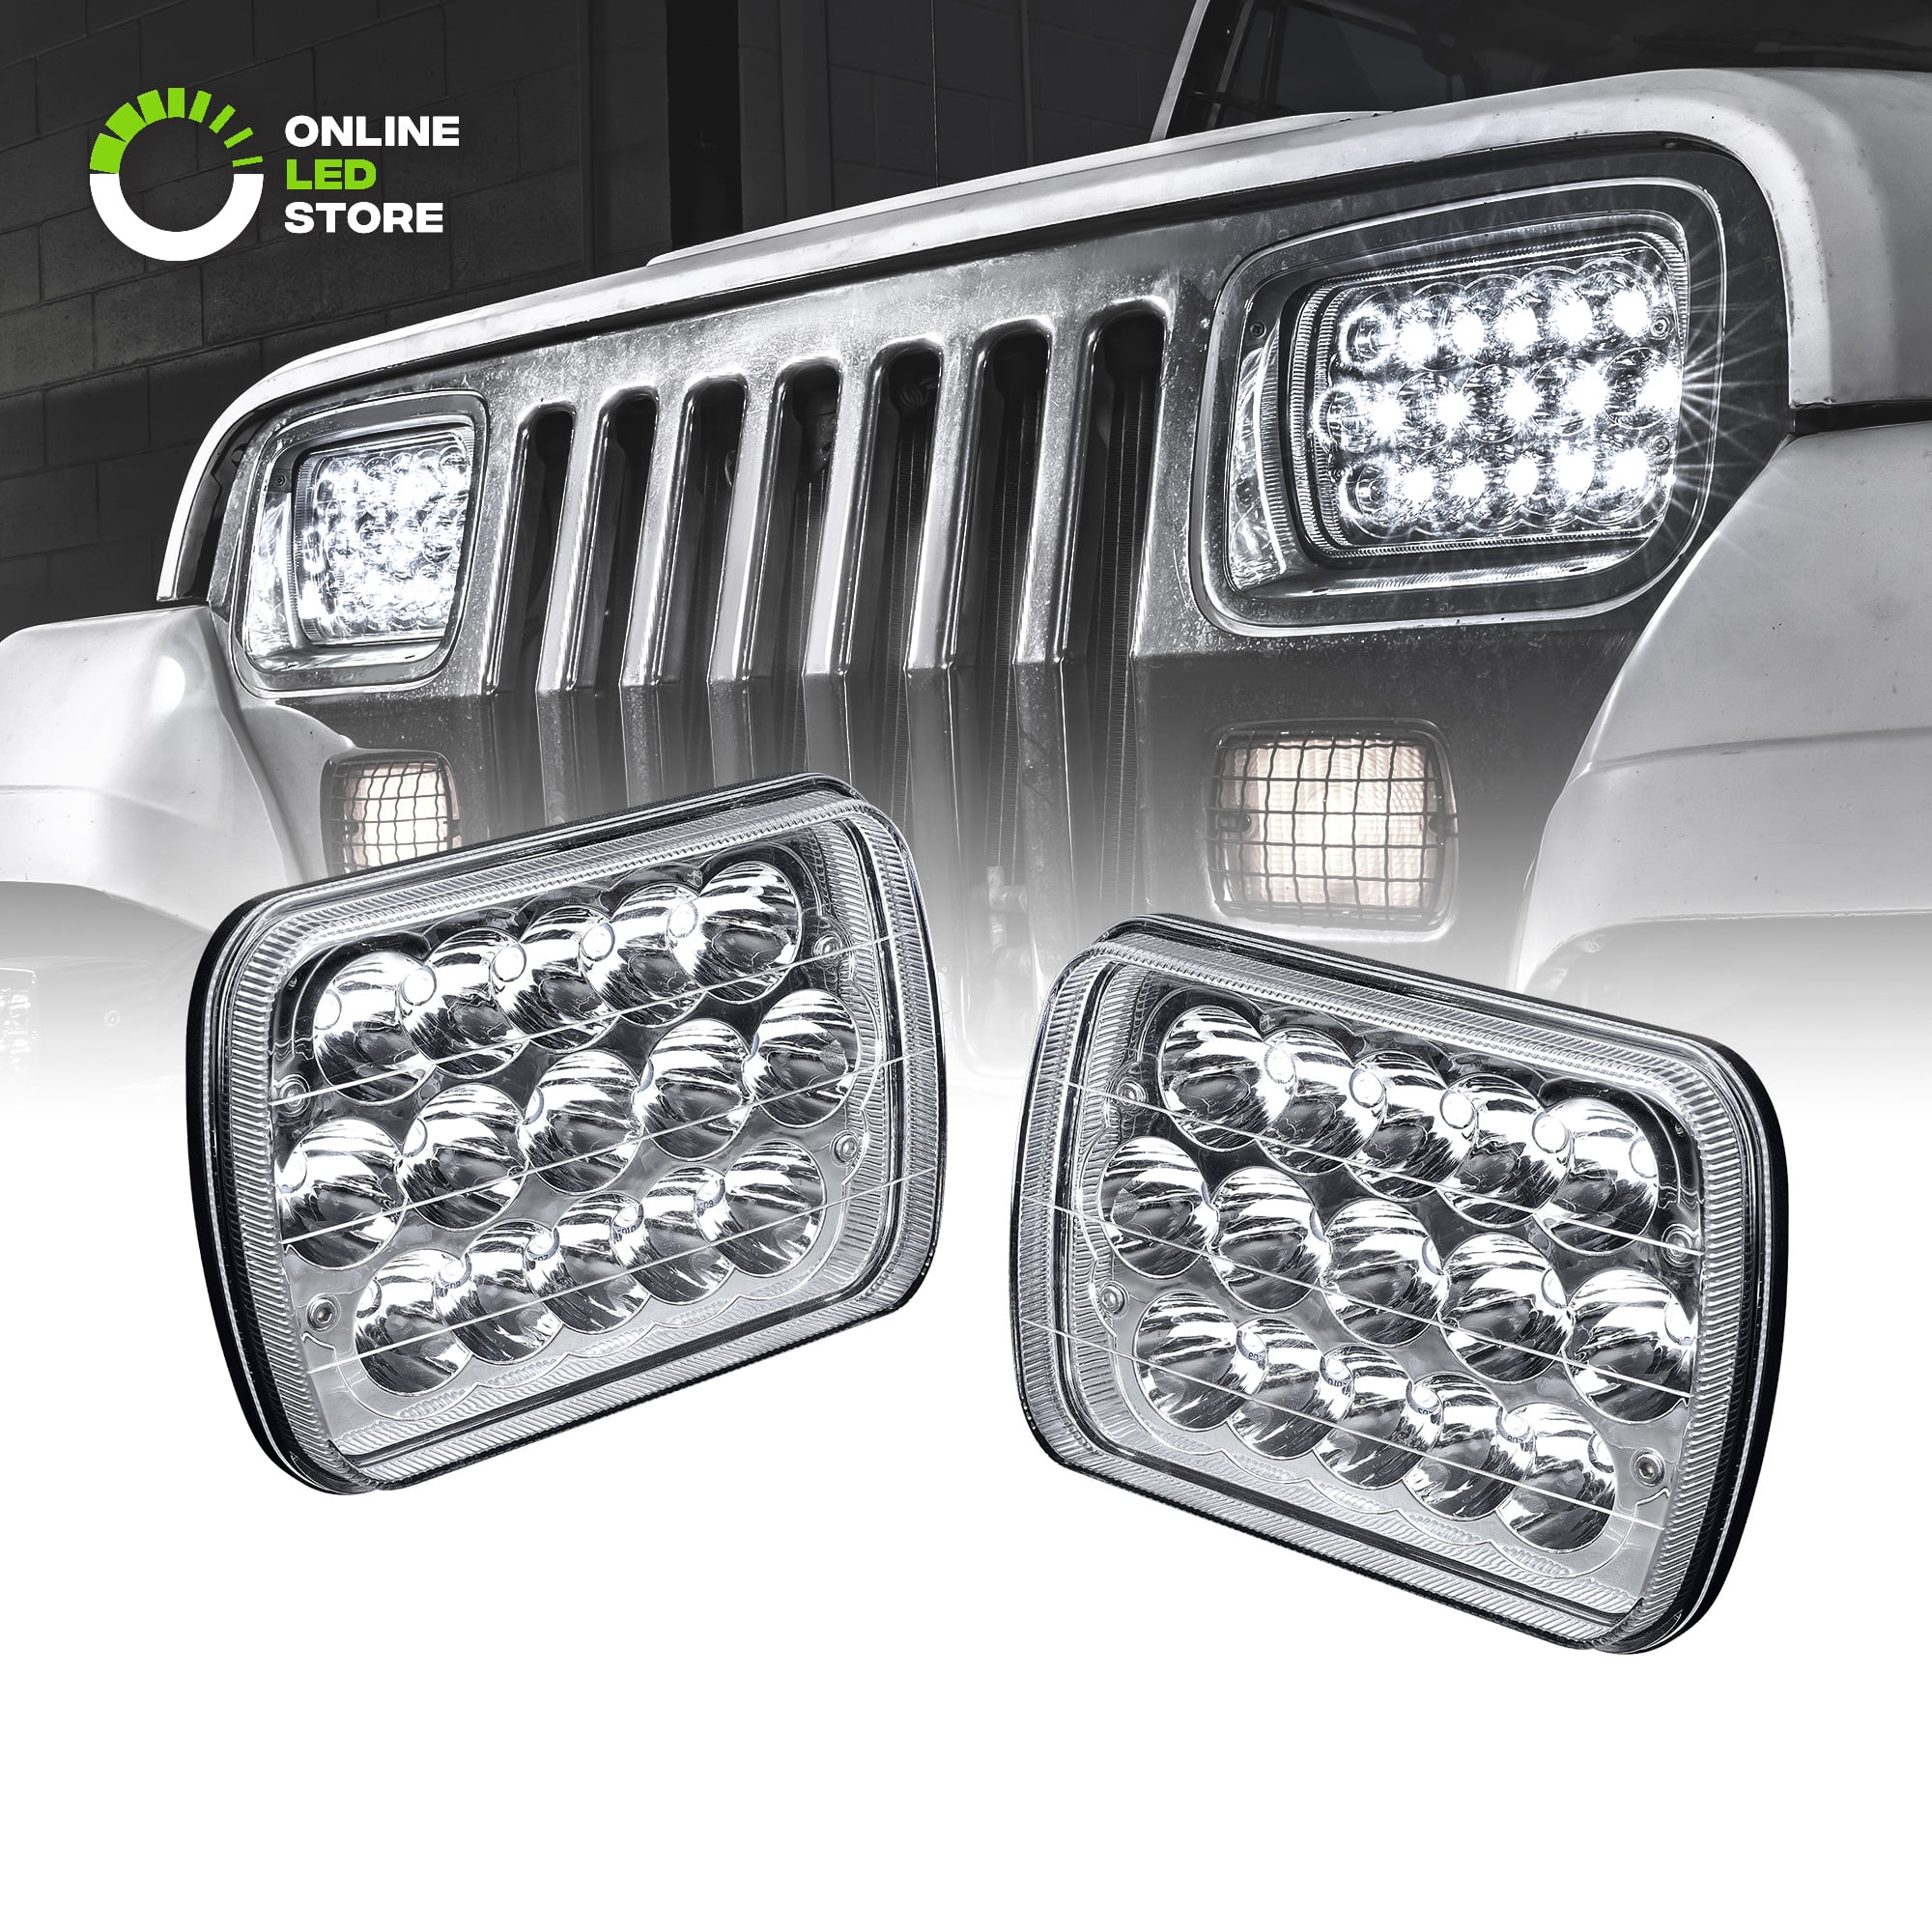 BLIAUTO 5x7 LED Headlights Dot Approved 7x6 Inch H6054 Rectangular Headlamps with High Low Beam H6054 6054 Led Headlight for Jeep Wrangler YJ Cherokee XJ H5054 H6054LL 6052 6053 2PCS 